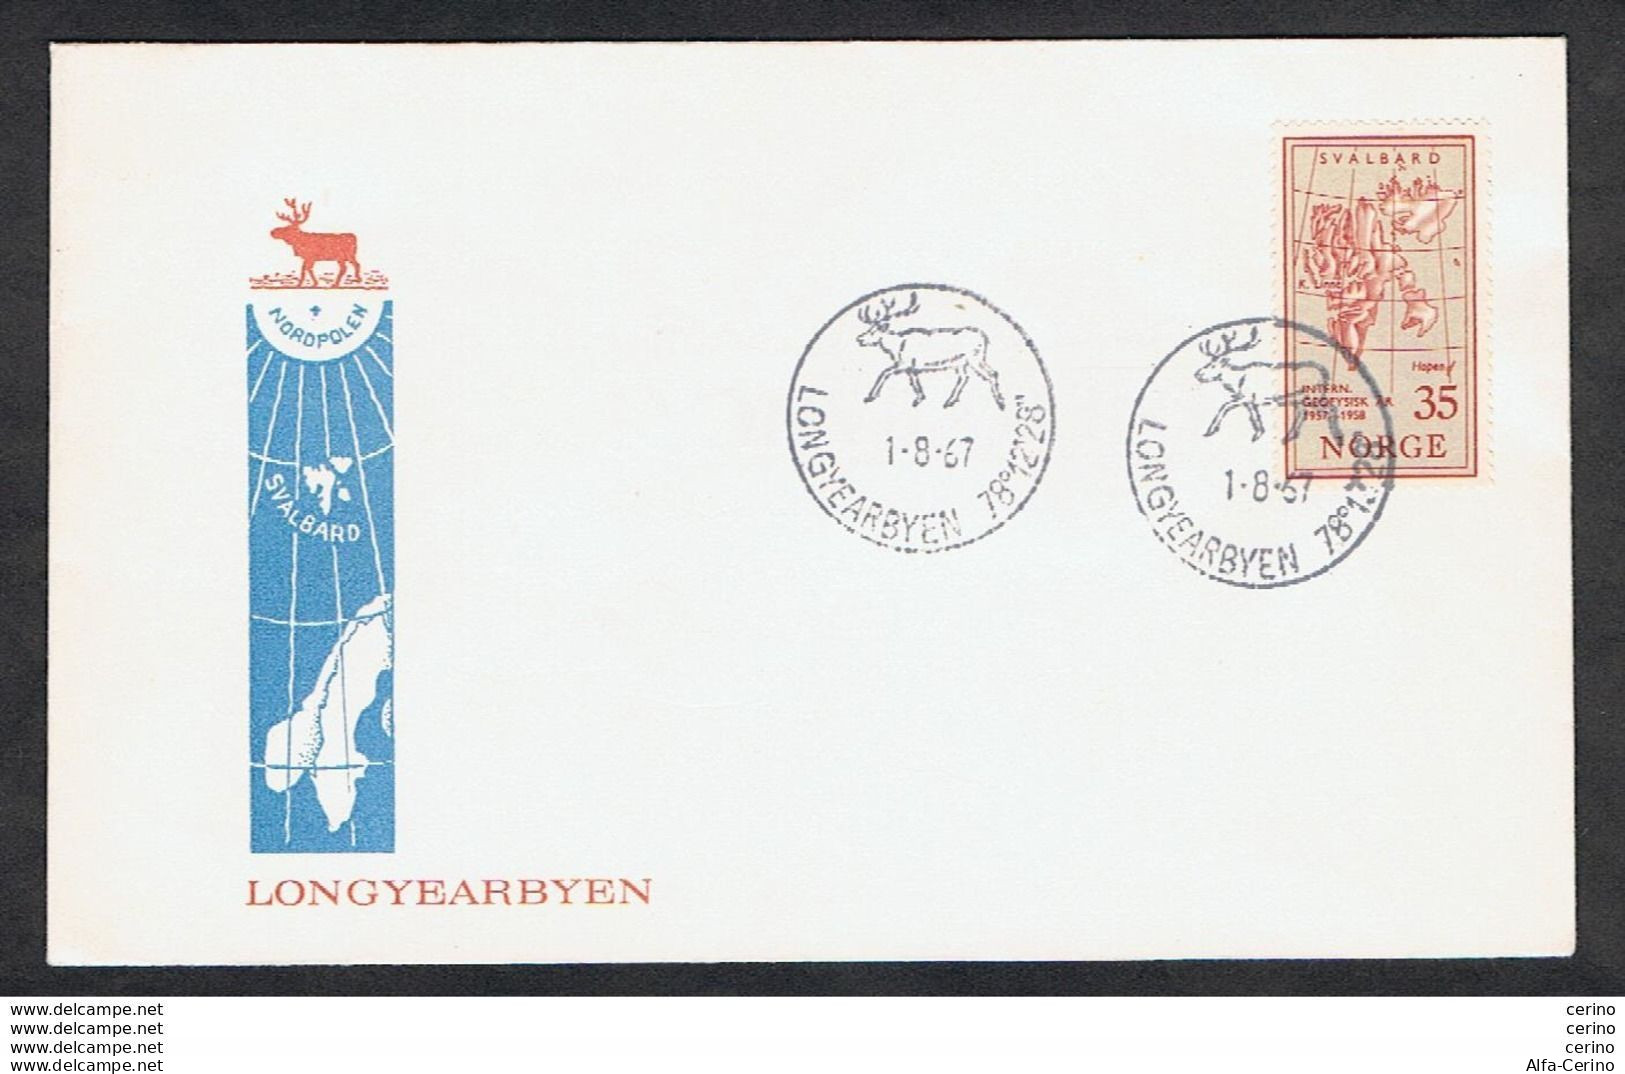 NORWAY: 1. 8. 1967 LONGYEARBYEN COVERT WITH 35 Ore RED AND GRAY (377) - Cartas & Documentos